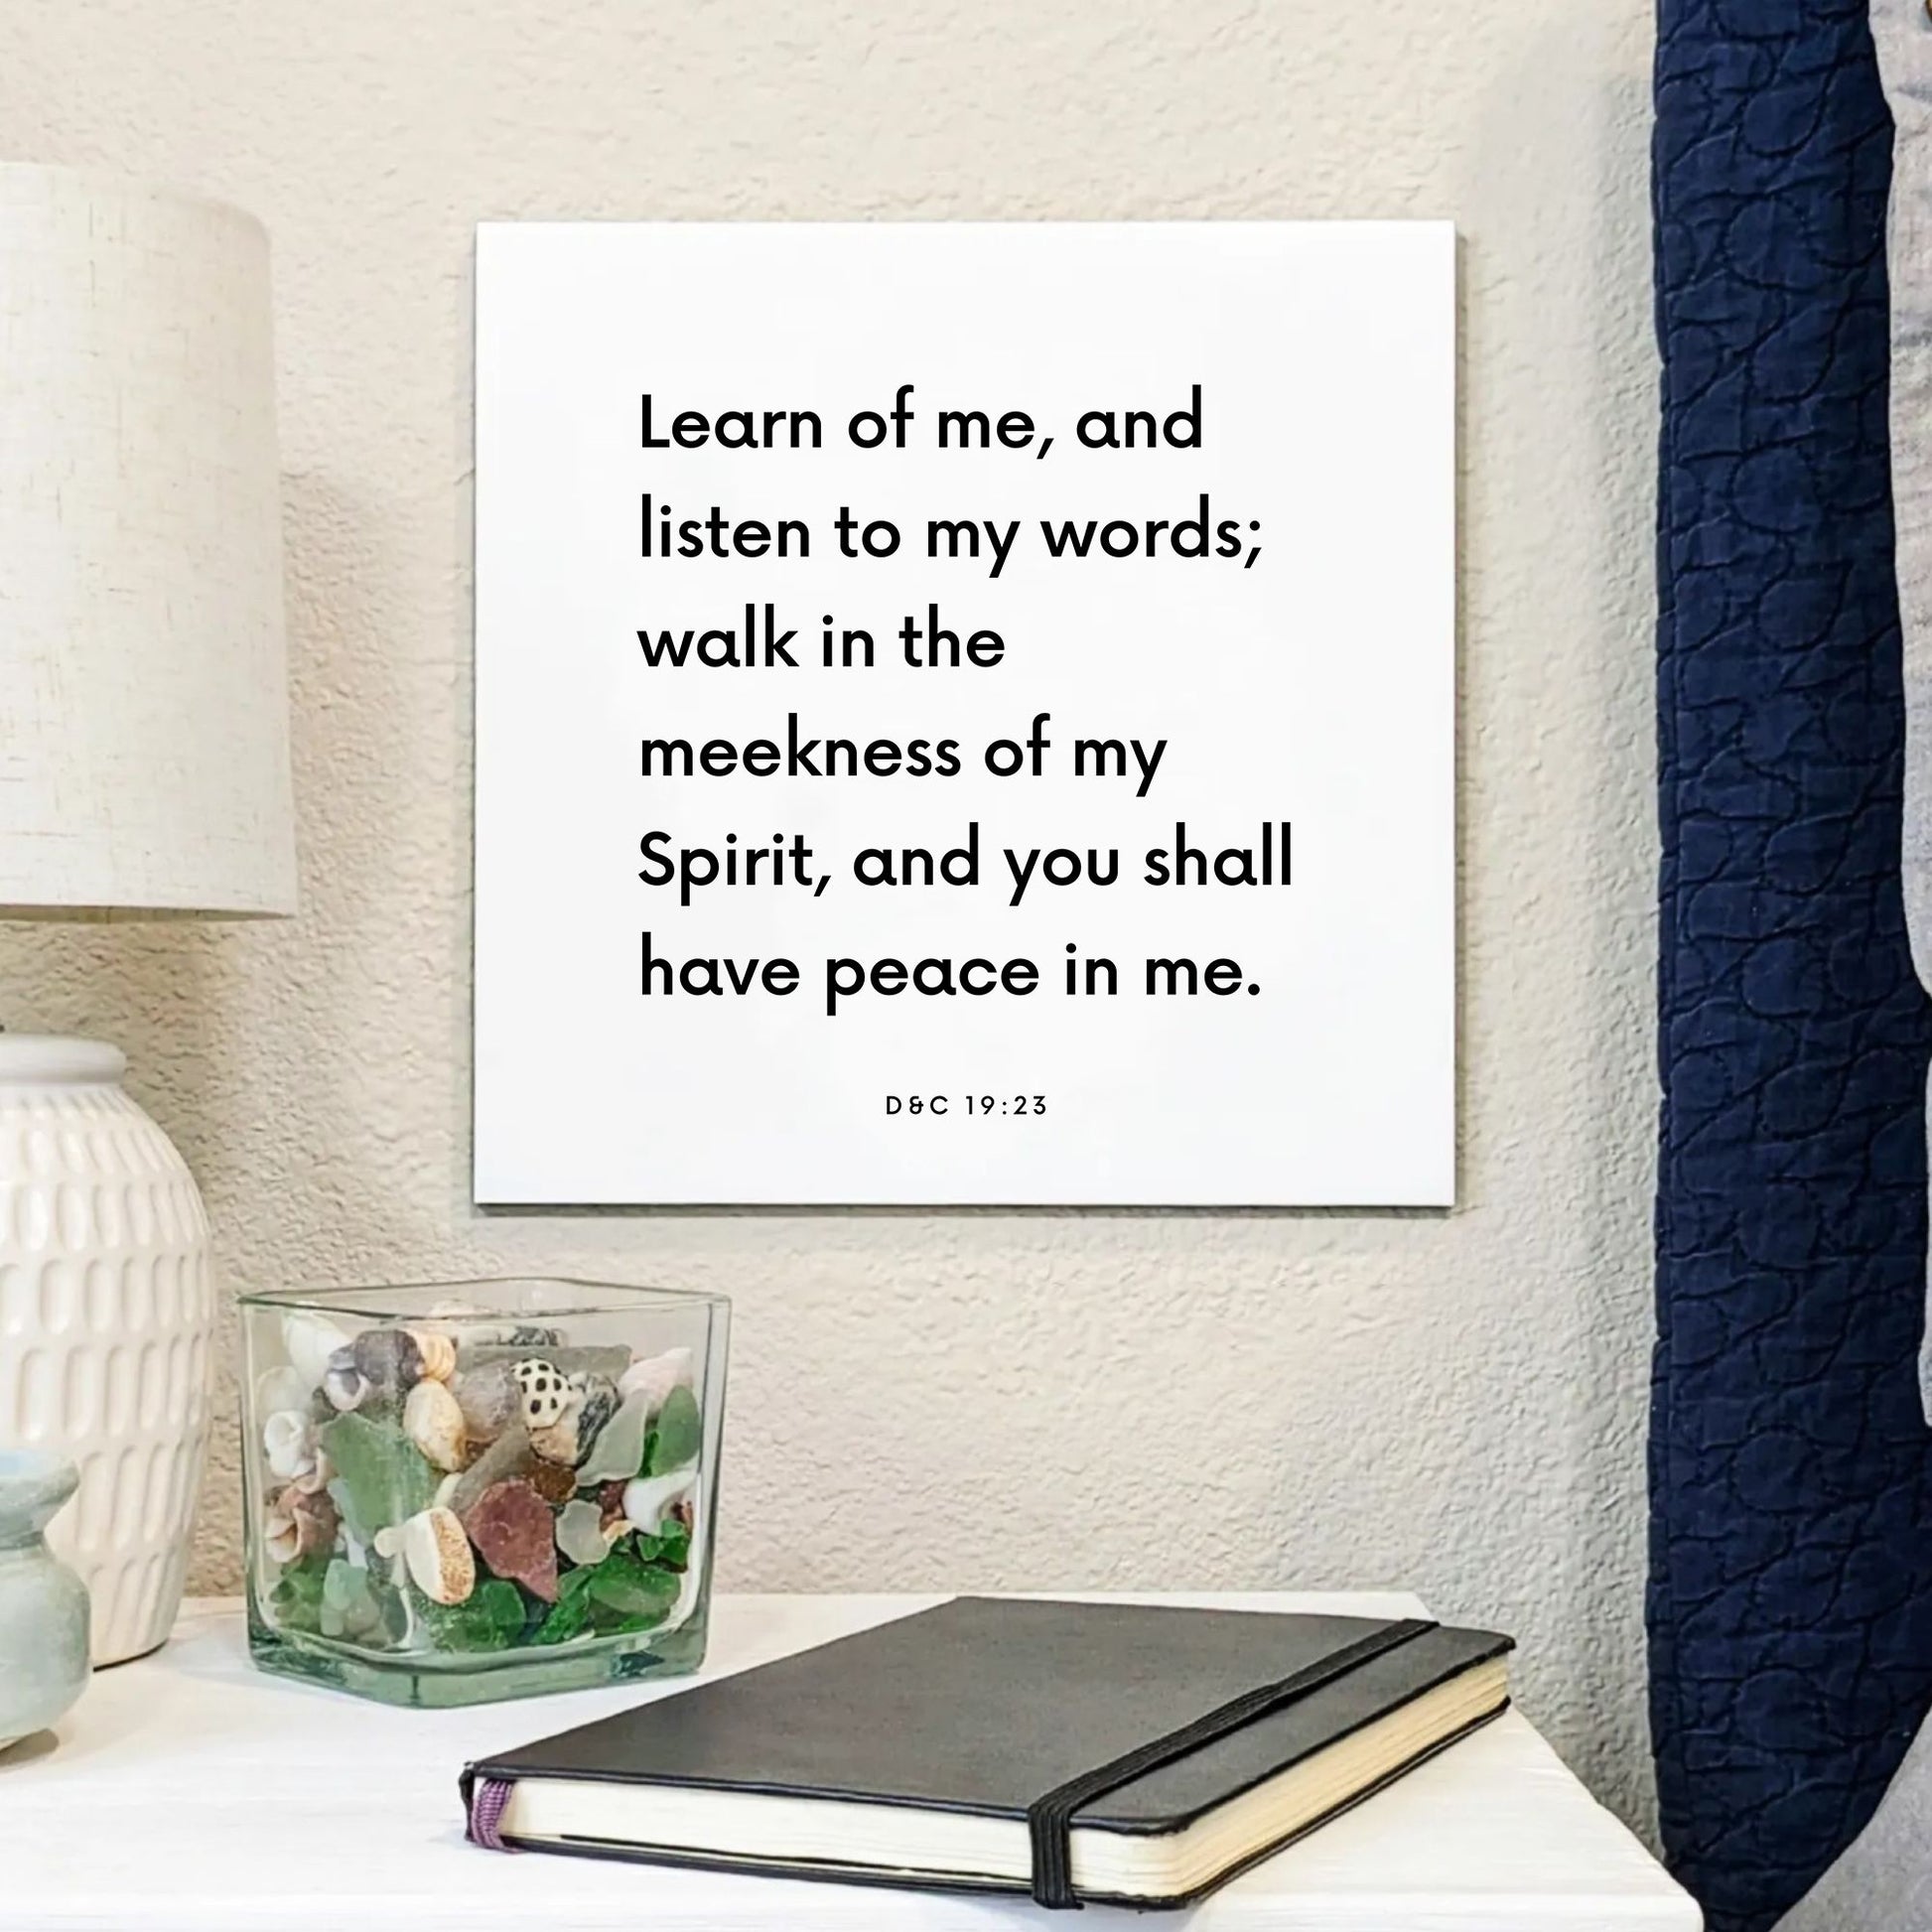 Bedside mouting of the scripture tile for D&C 19:23 - "Learn of me, and listen to my words"